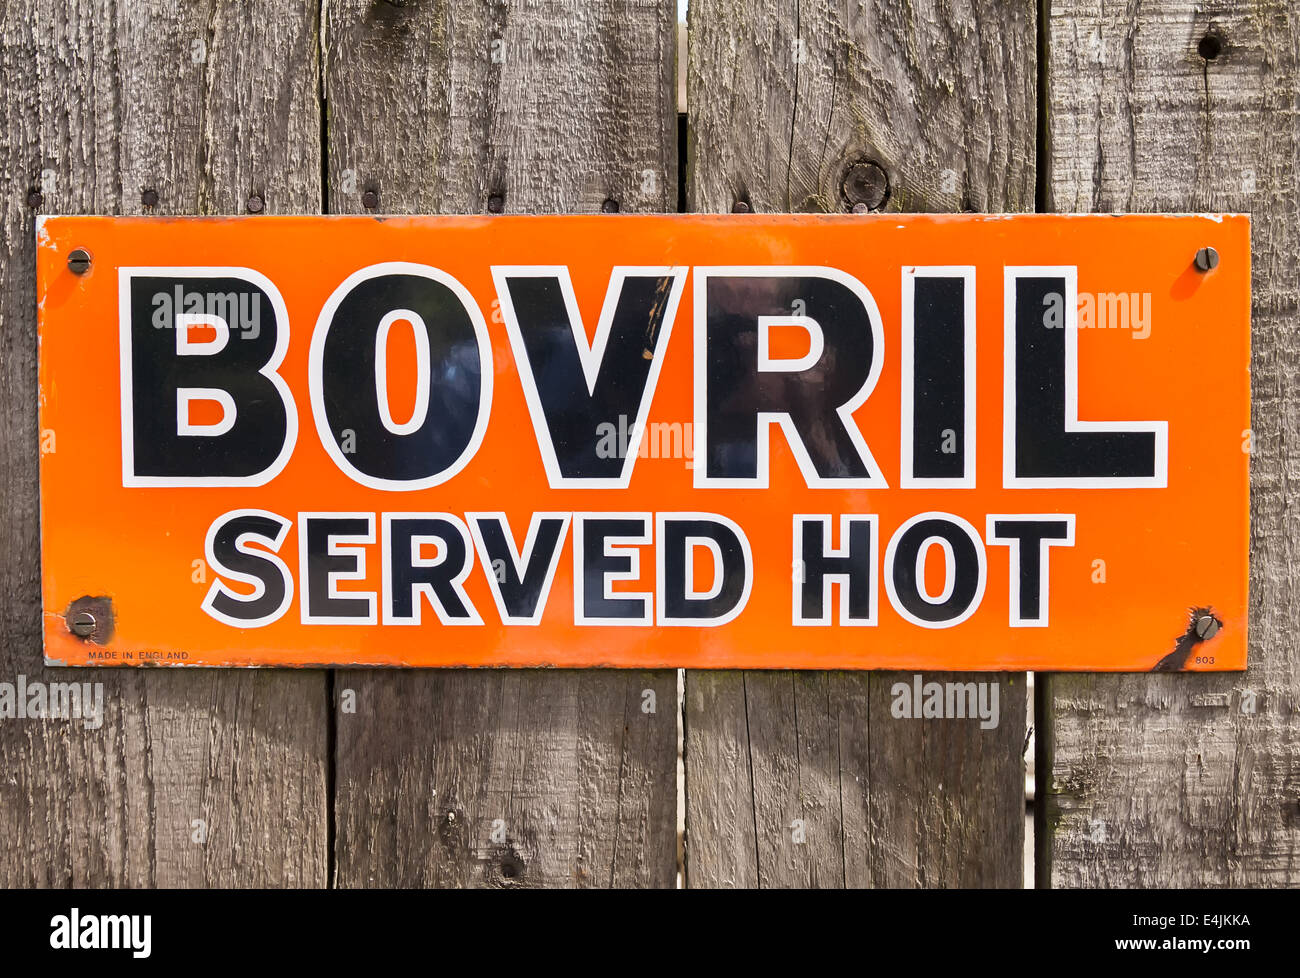 Vintage Advertisement Hoarding of Bovril Served hot on wood panels. Stock Photo